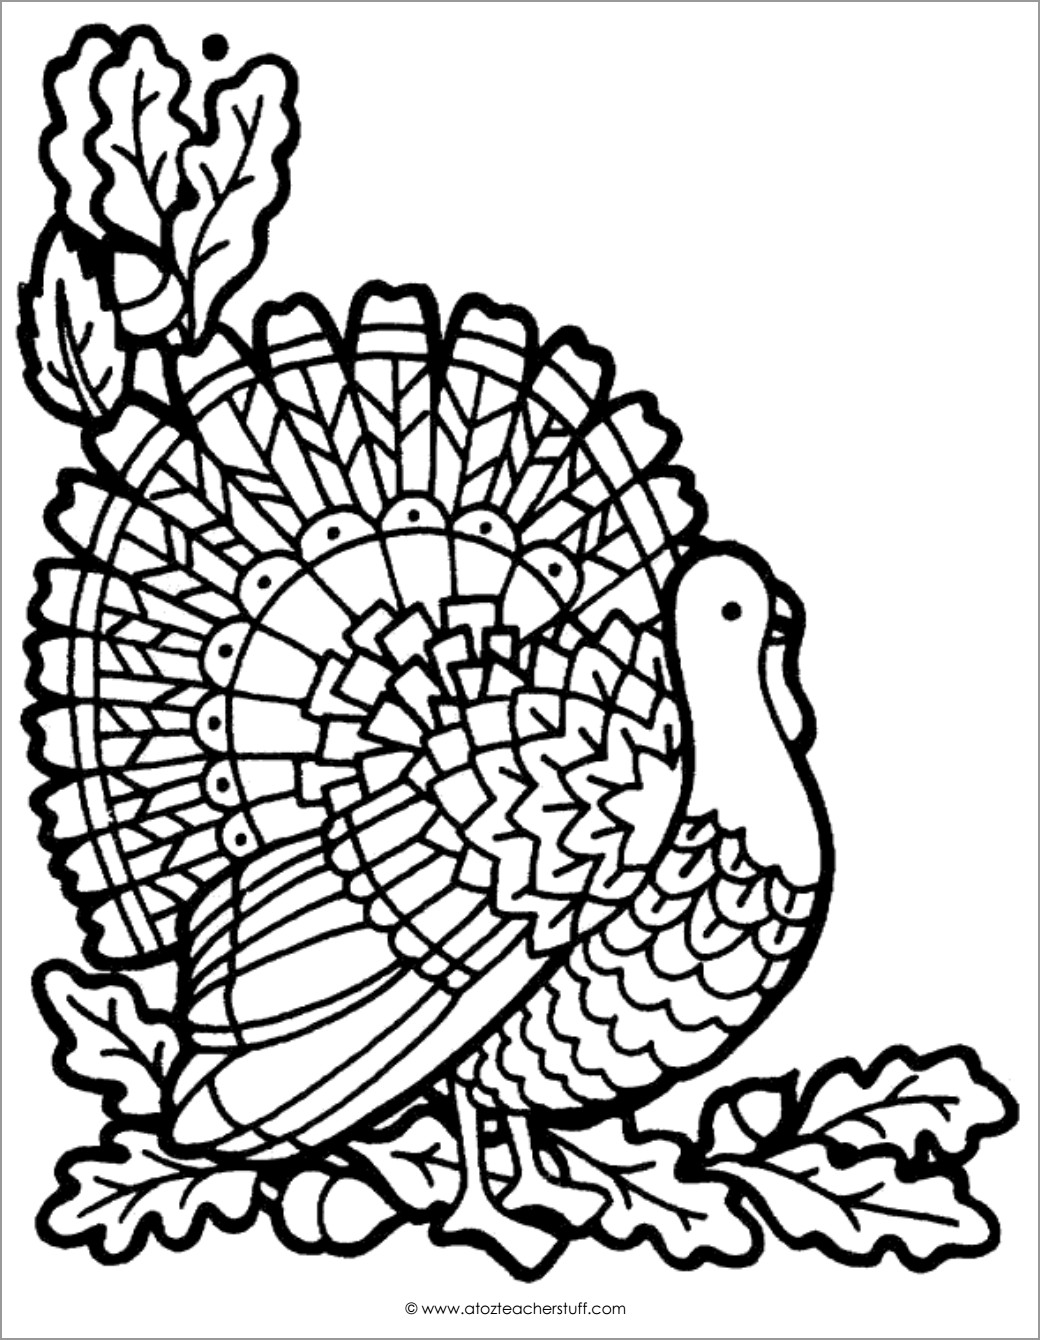 Turkey Coloring Page for Adults